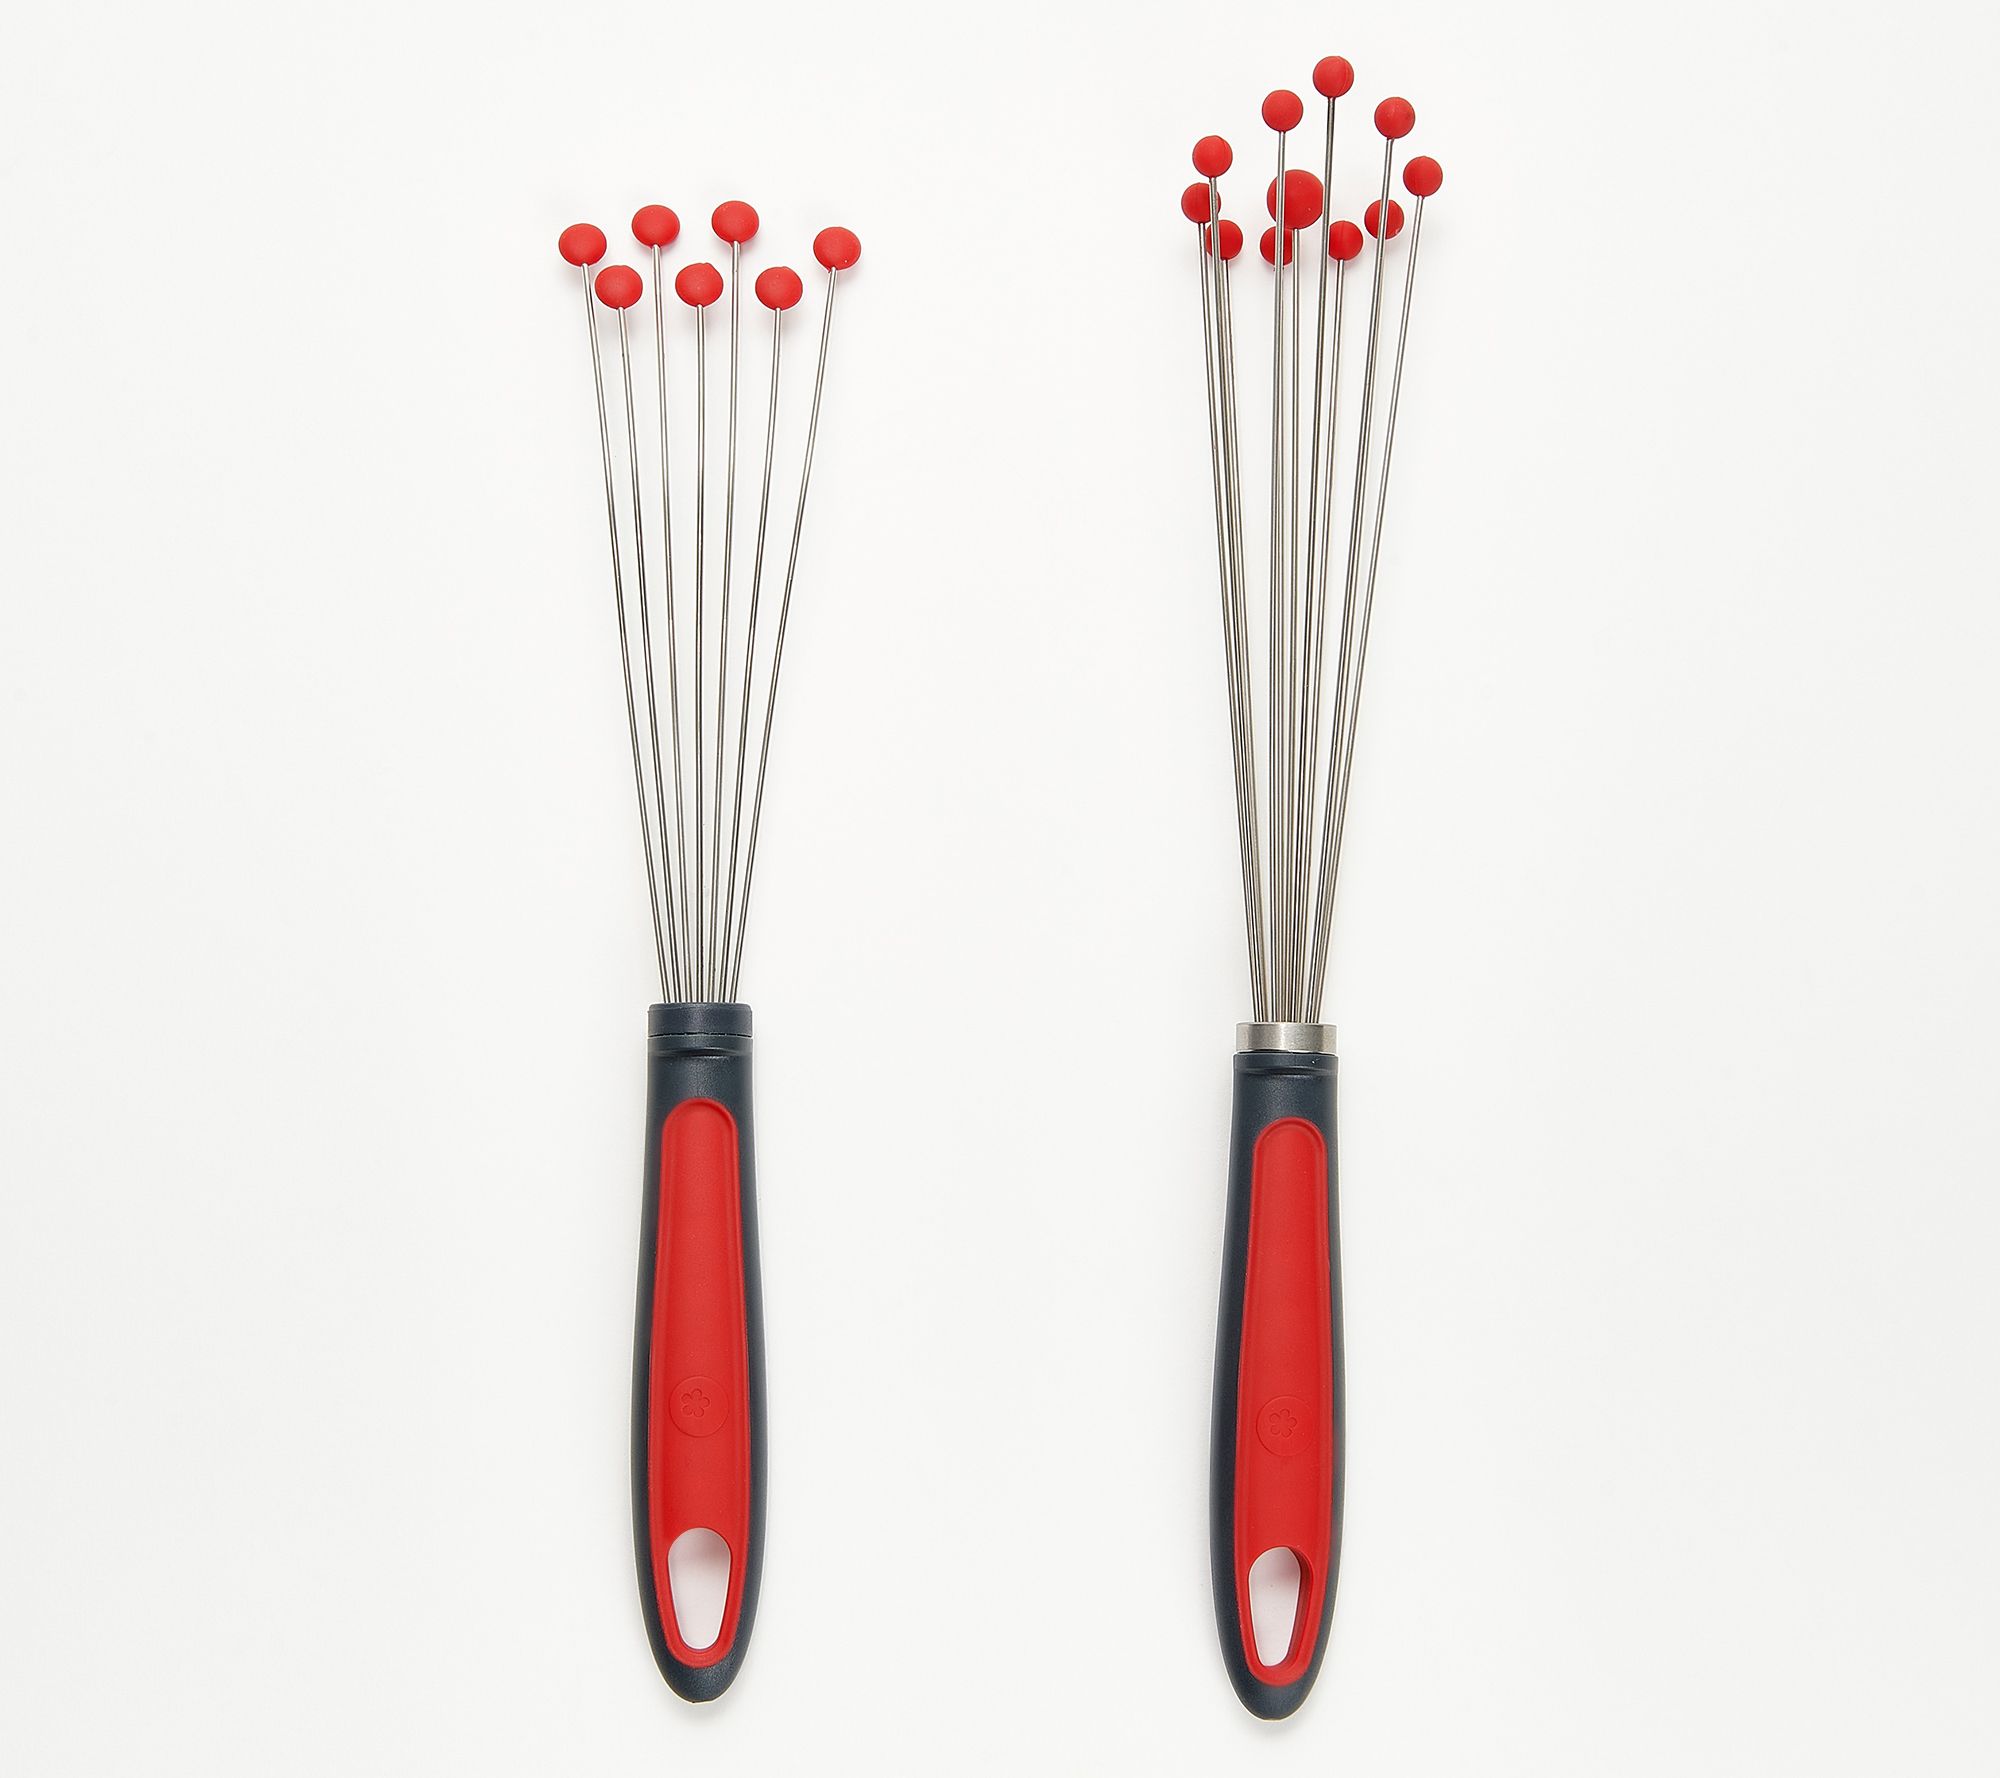 All-Clad Silicone Ball Whisk